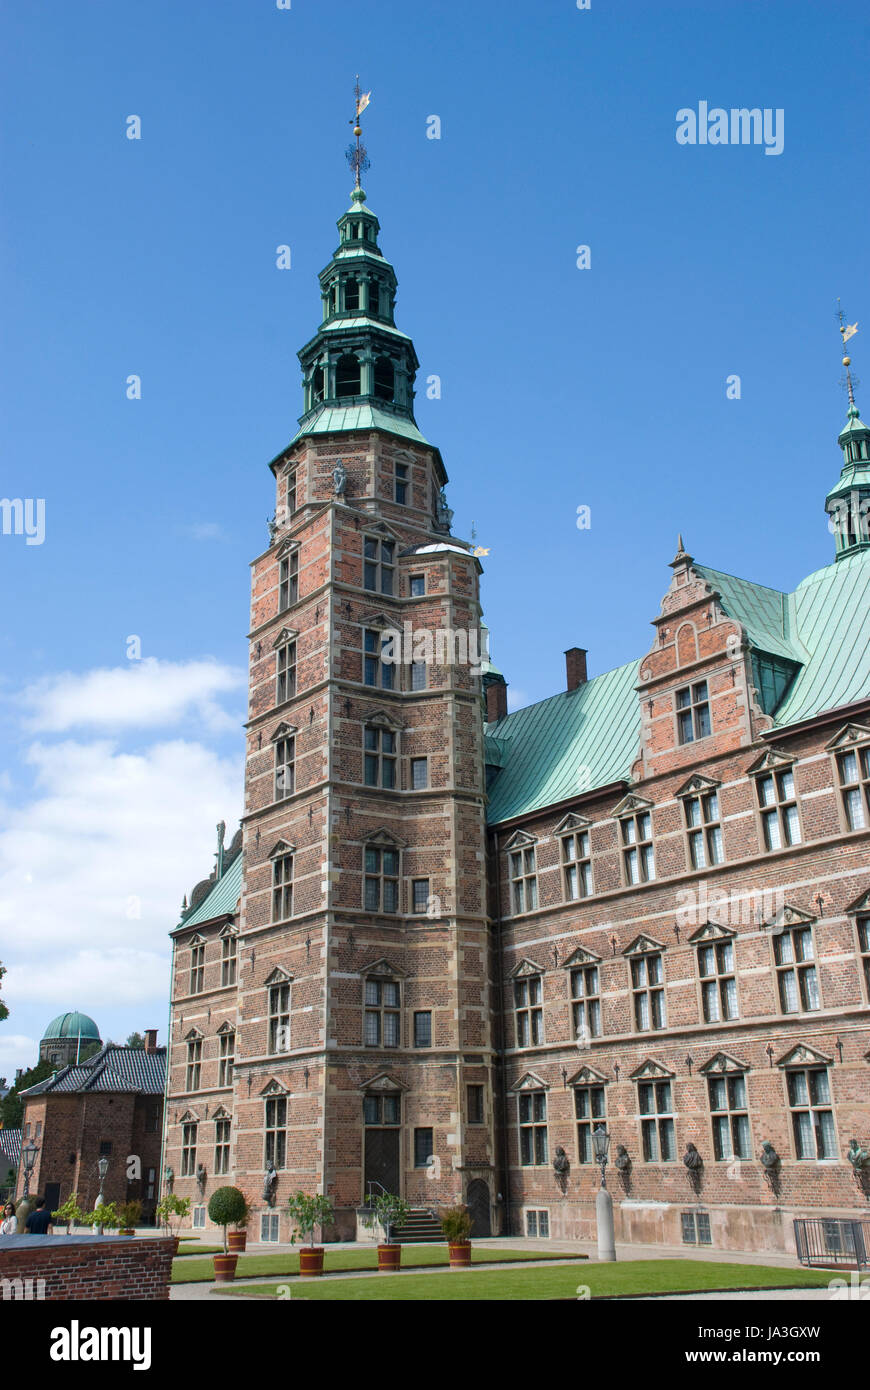 denmark, style of construction, architecture, architectural style, scandinavia, Stock Photo